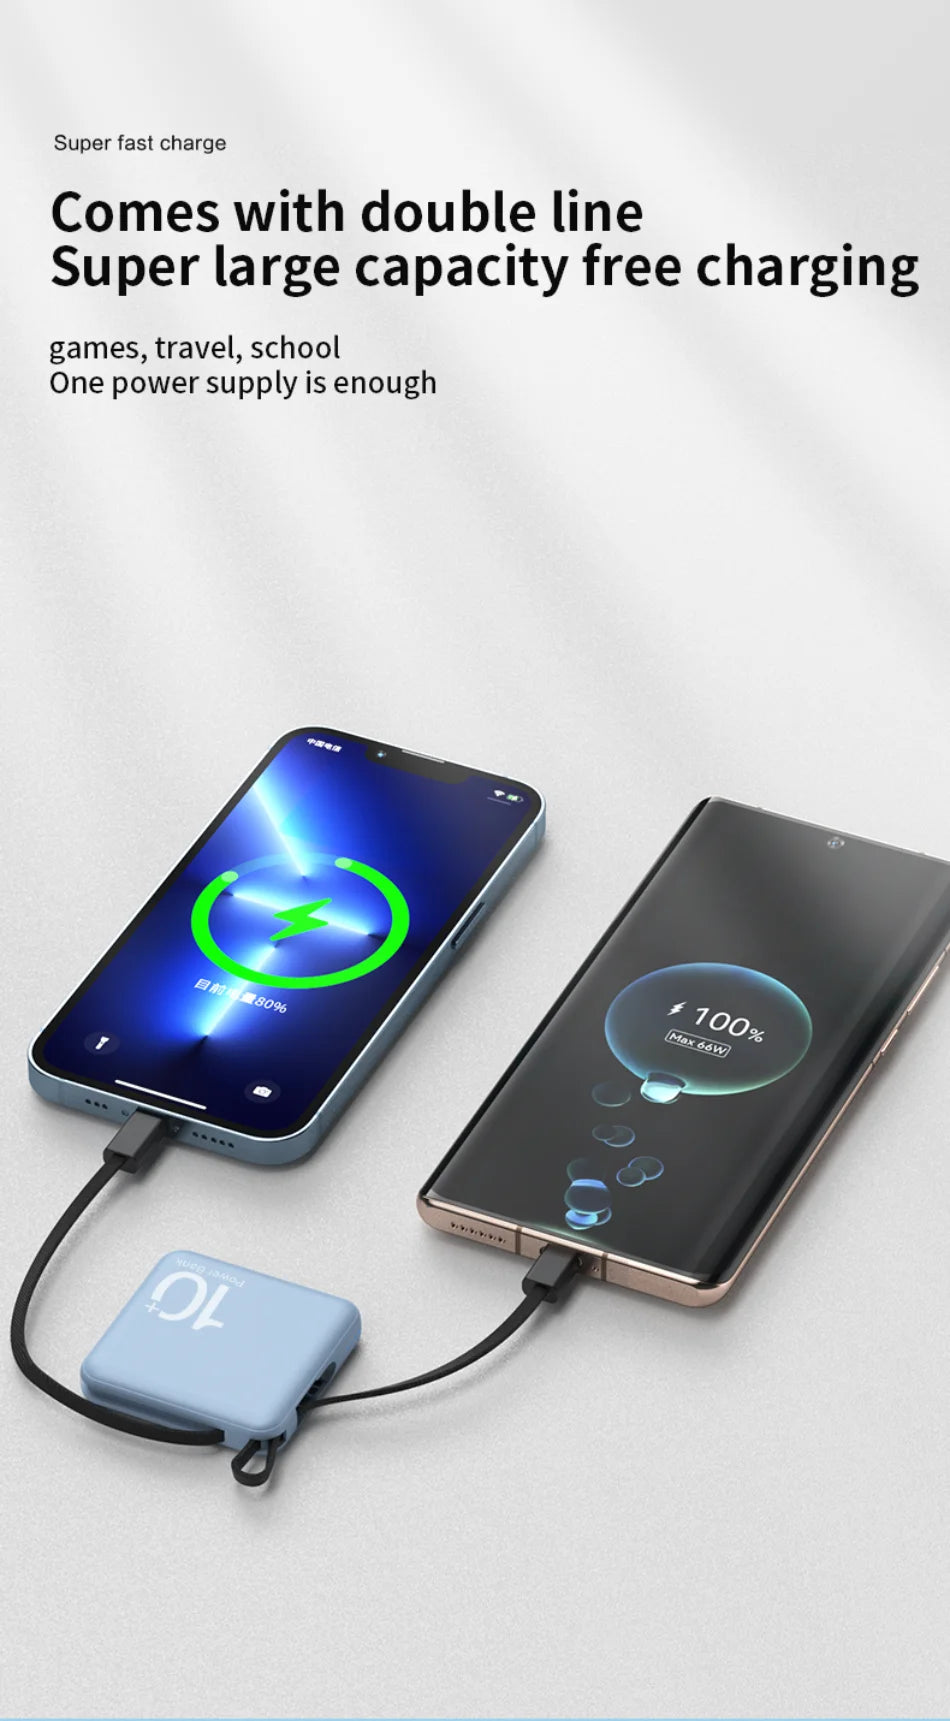 Super Fast Power Bank 5000mAh-30000mAh Built-in Cables - Inverted Powers